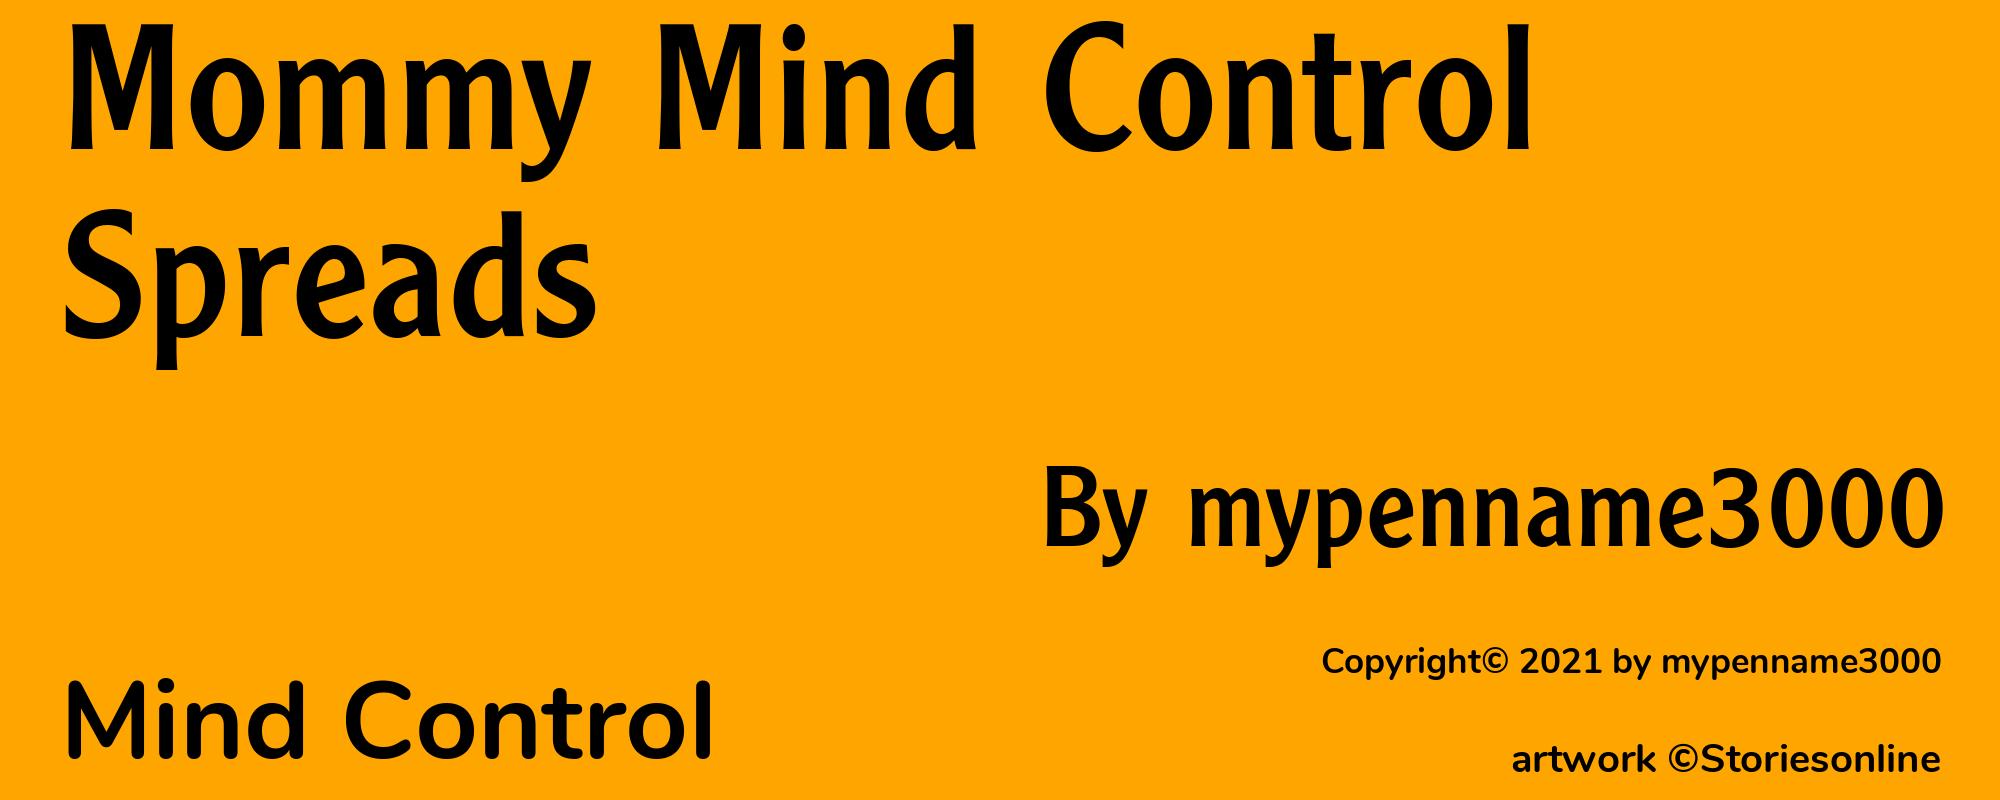 Mommy Mind Control Spreads - Cover